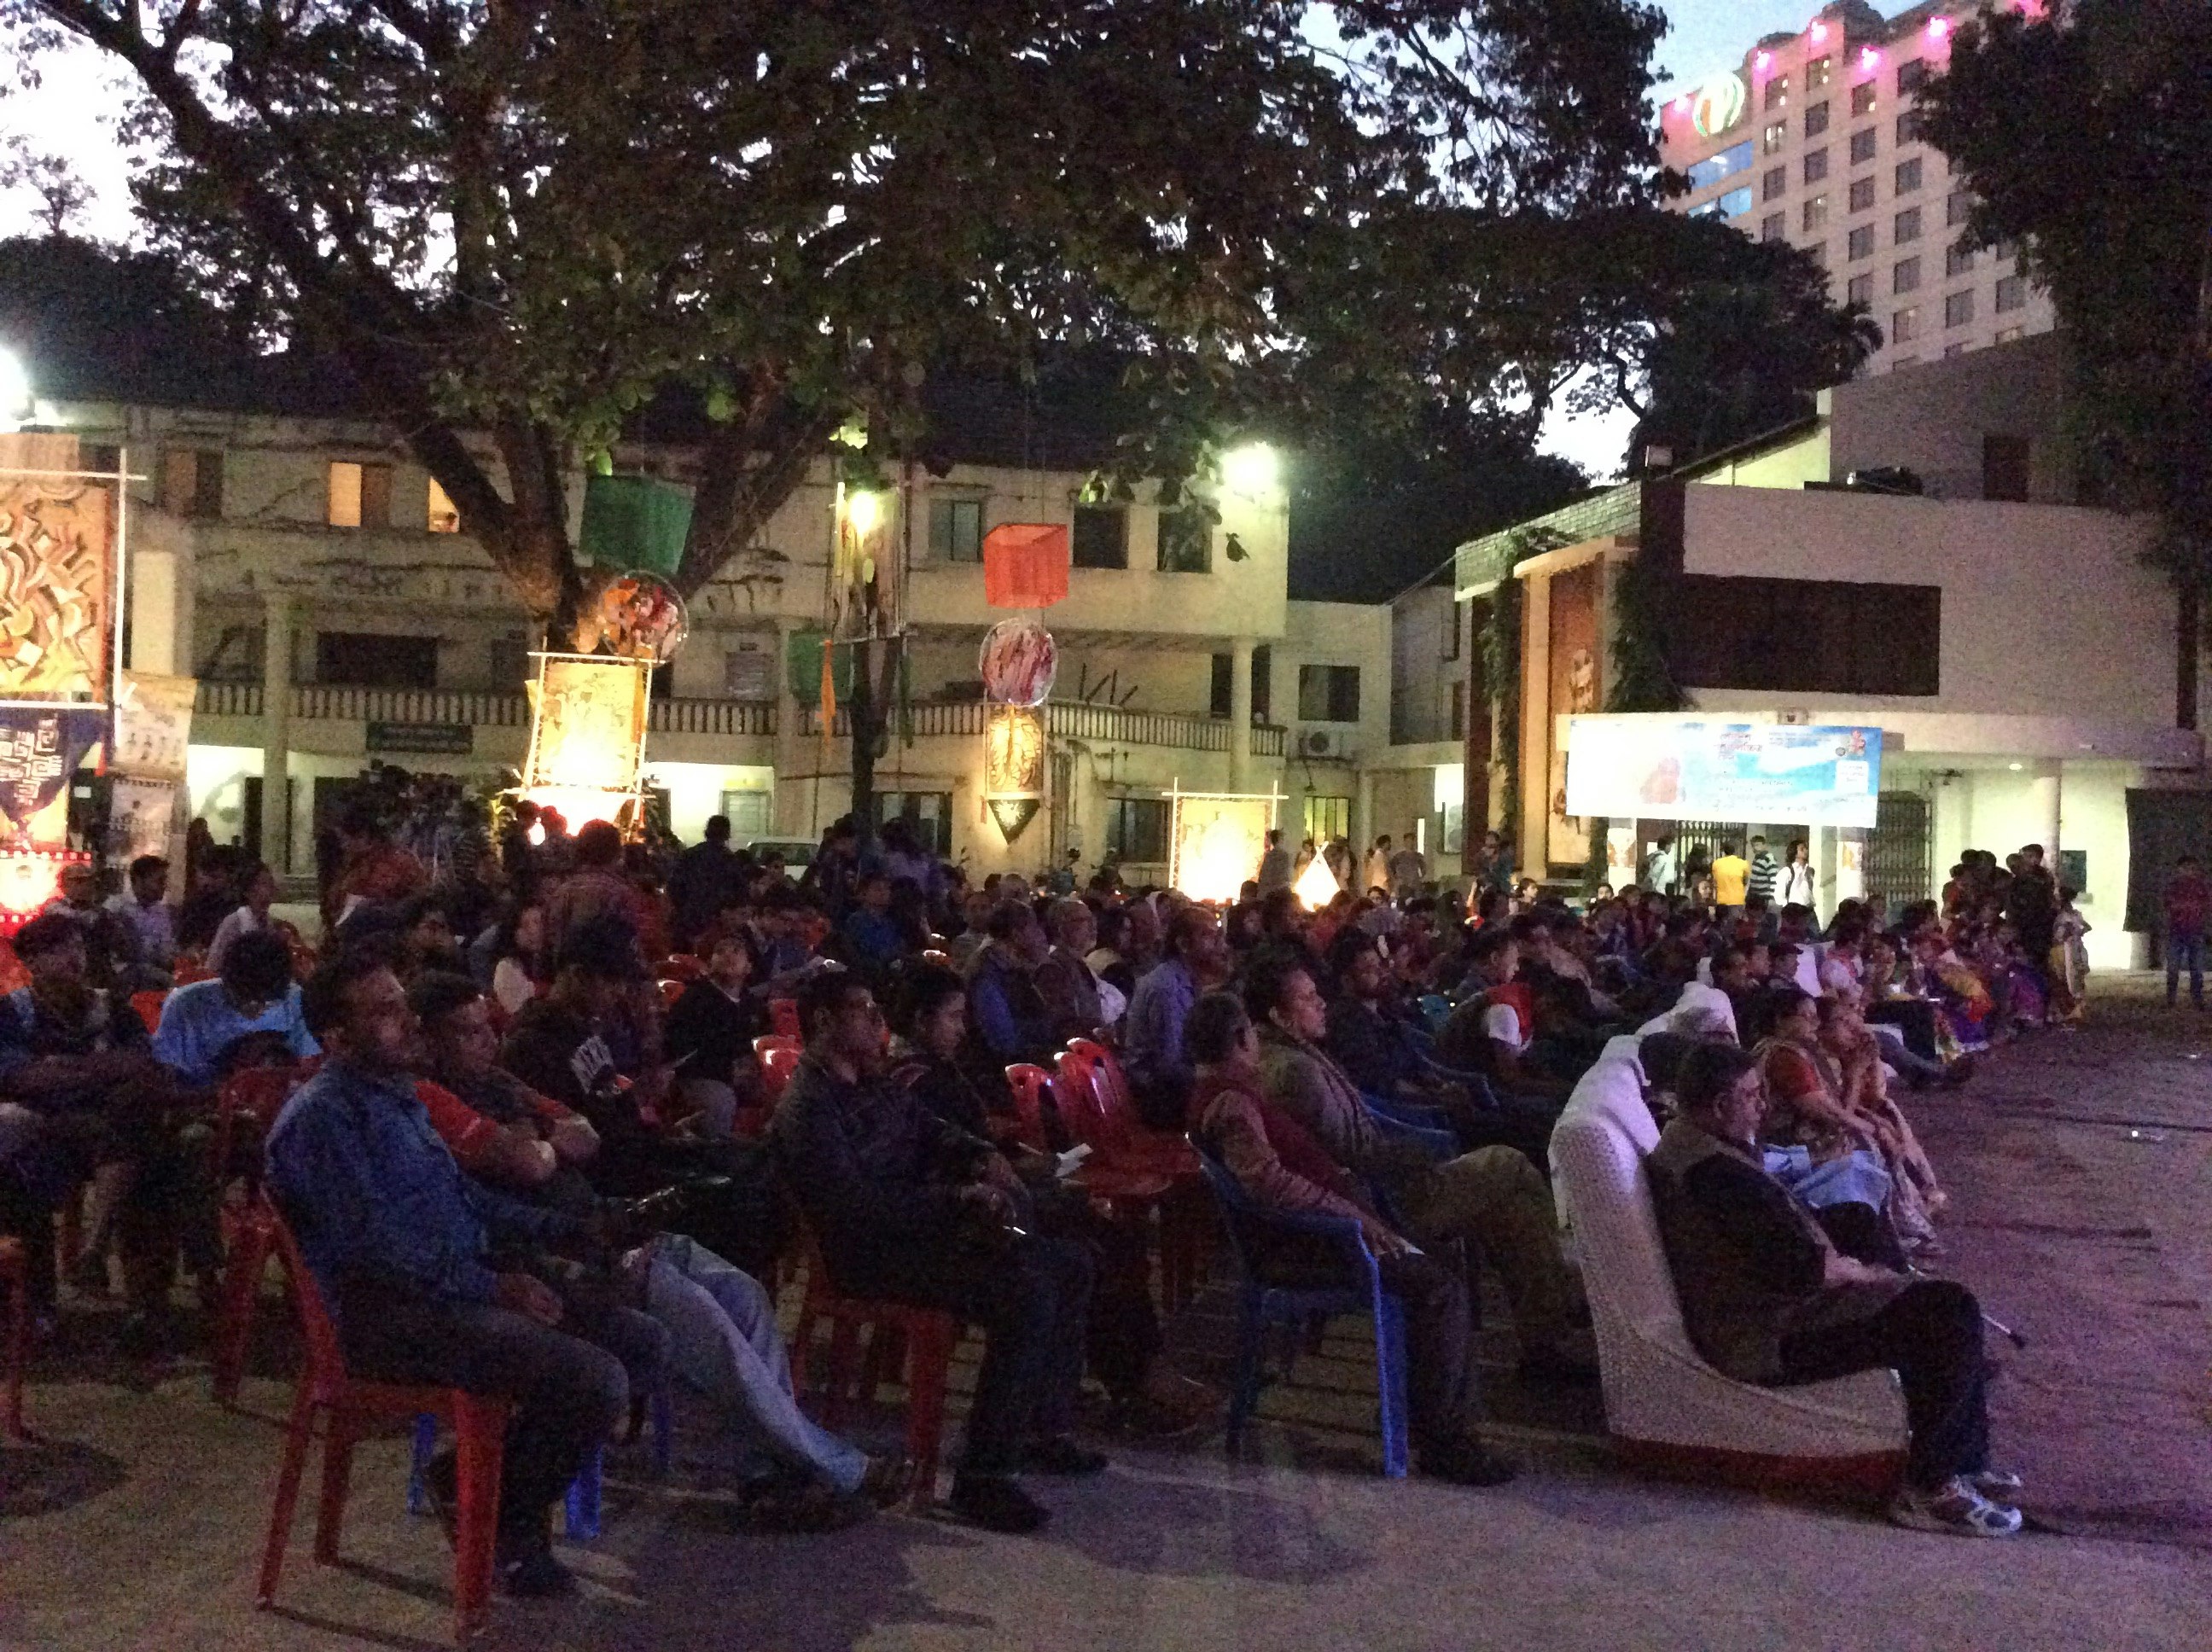 A Bangladeshi audience sits on chairs in an outdoor setting in the evening, looking at an illuminated production (production is out of frame).